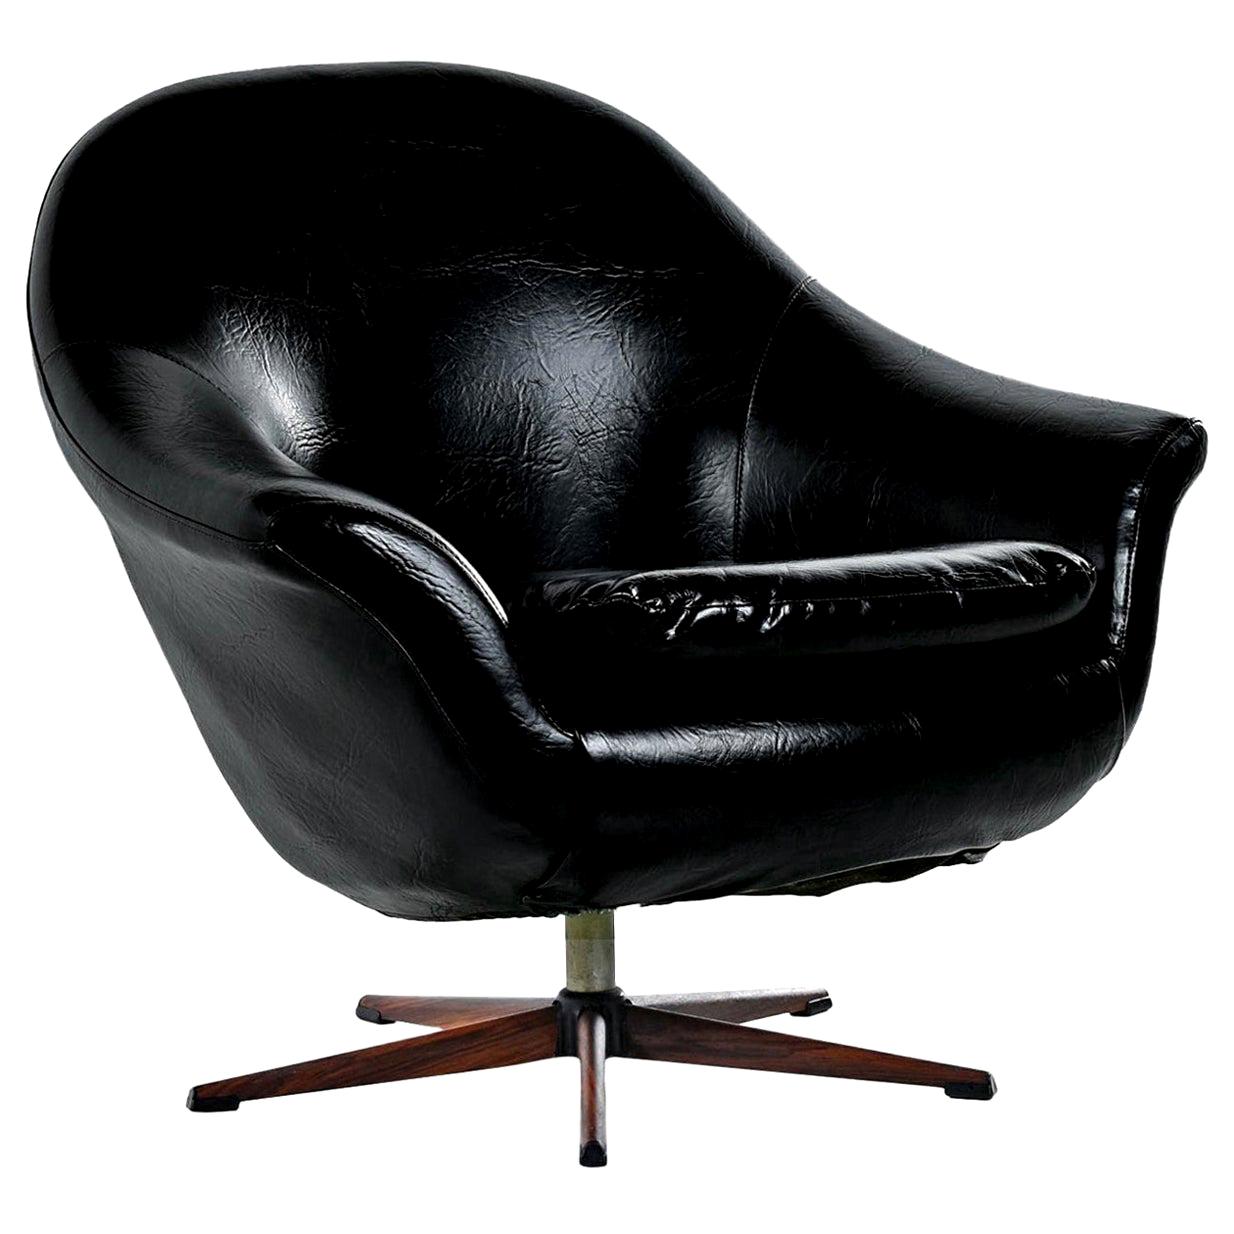 Iconic retro chair, black vinyl, five-star base. Similar to Swedish producer Overman pod chair. Use it as an armchair in the living room or as your desk chair. This vintage chair has more padding than the original pod chairs by Scandinavian Overman.